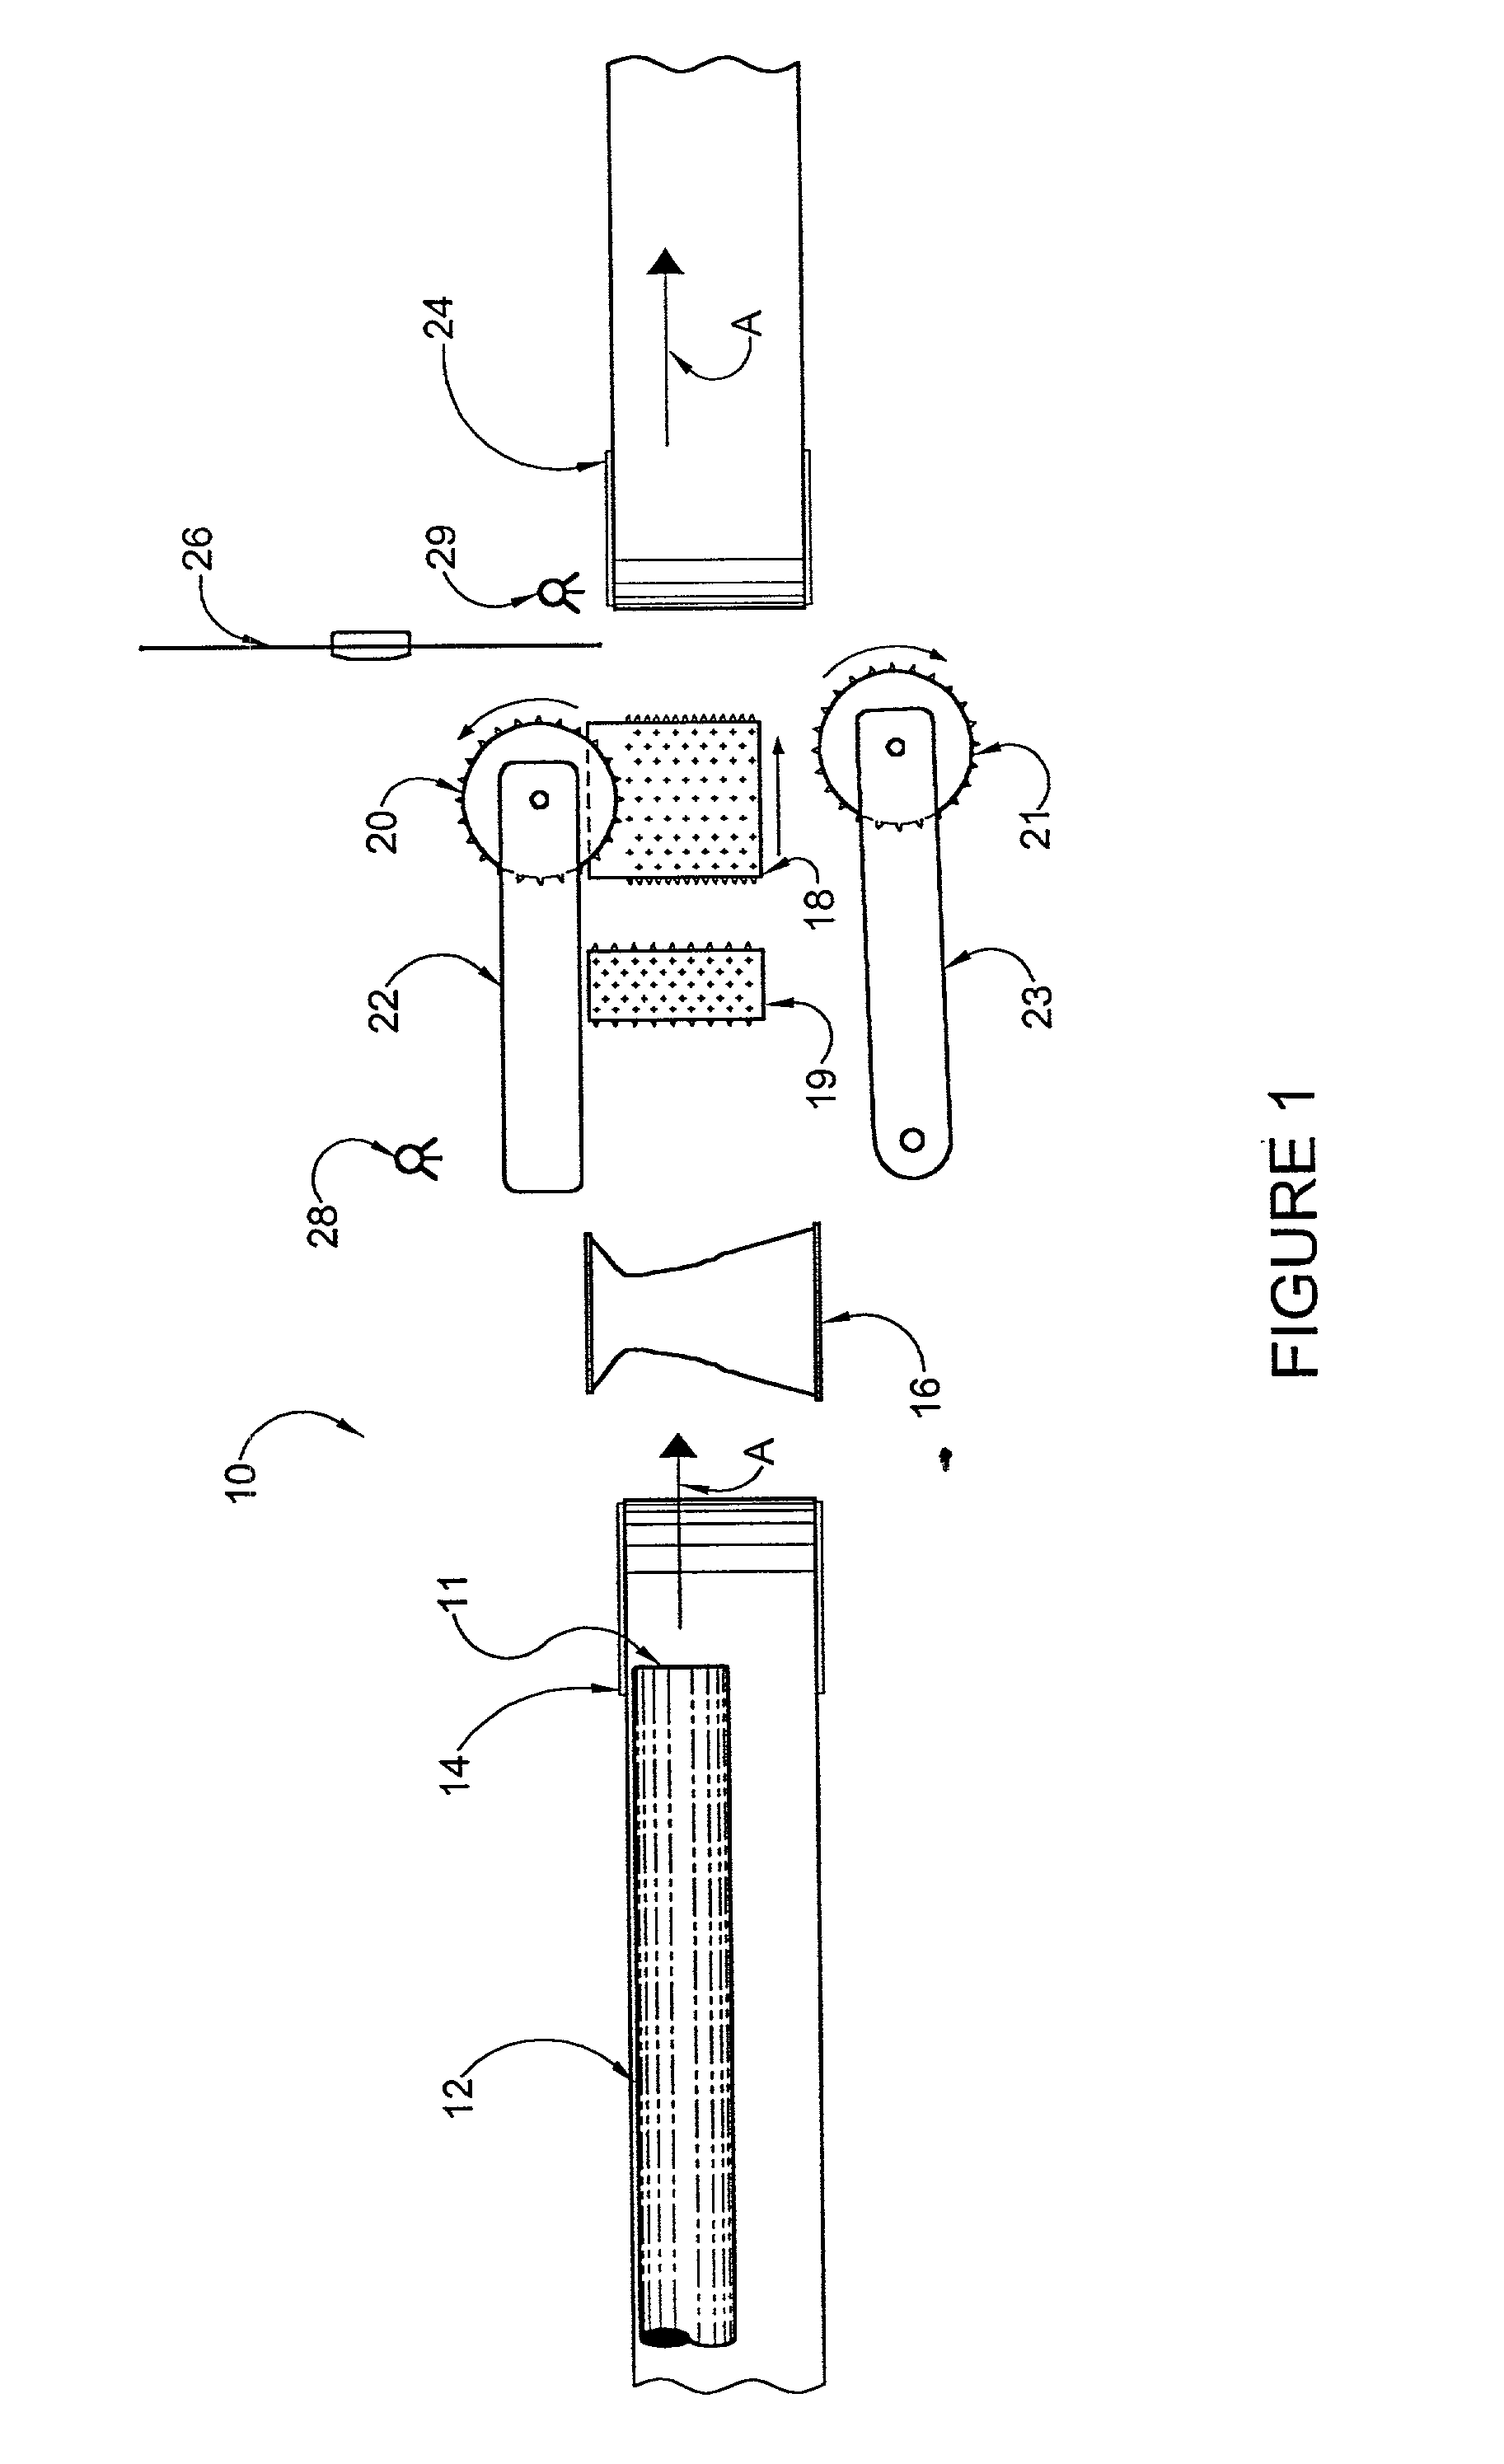 Method and apparatus for bucksawing logs